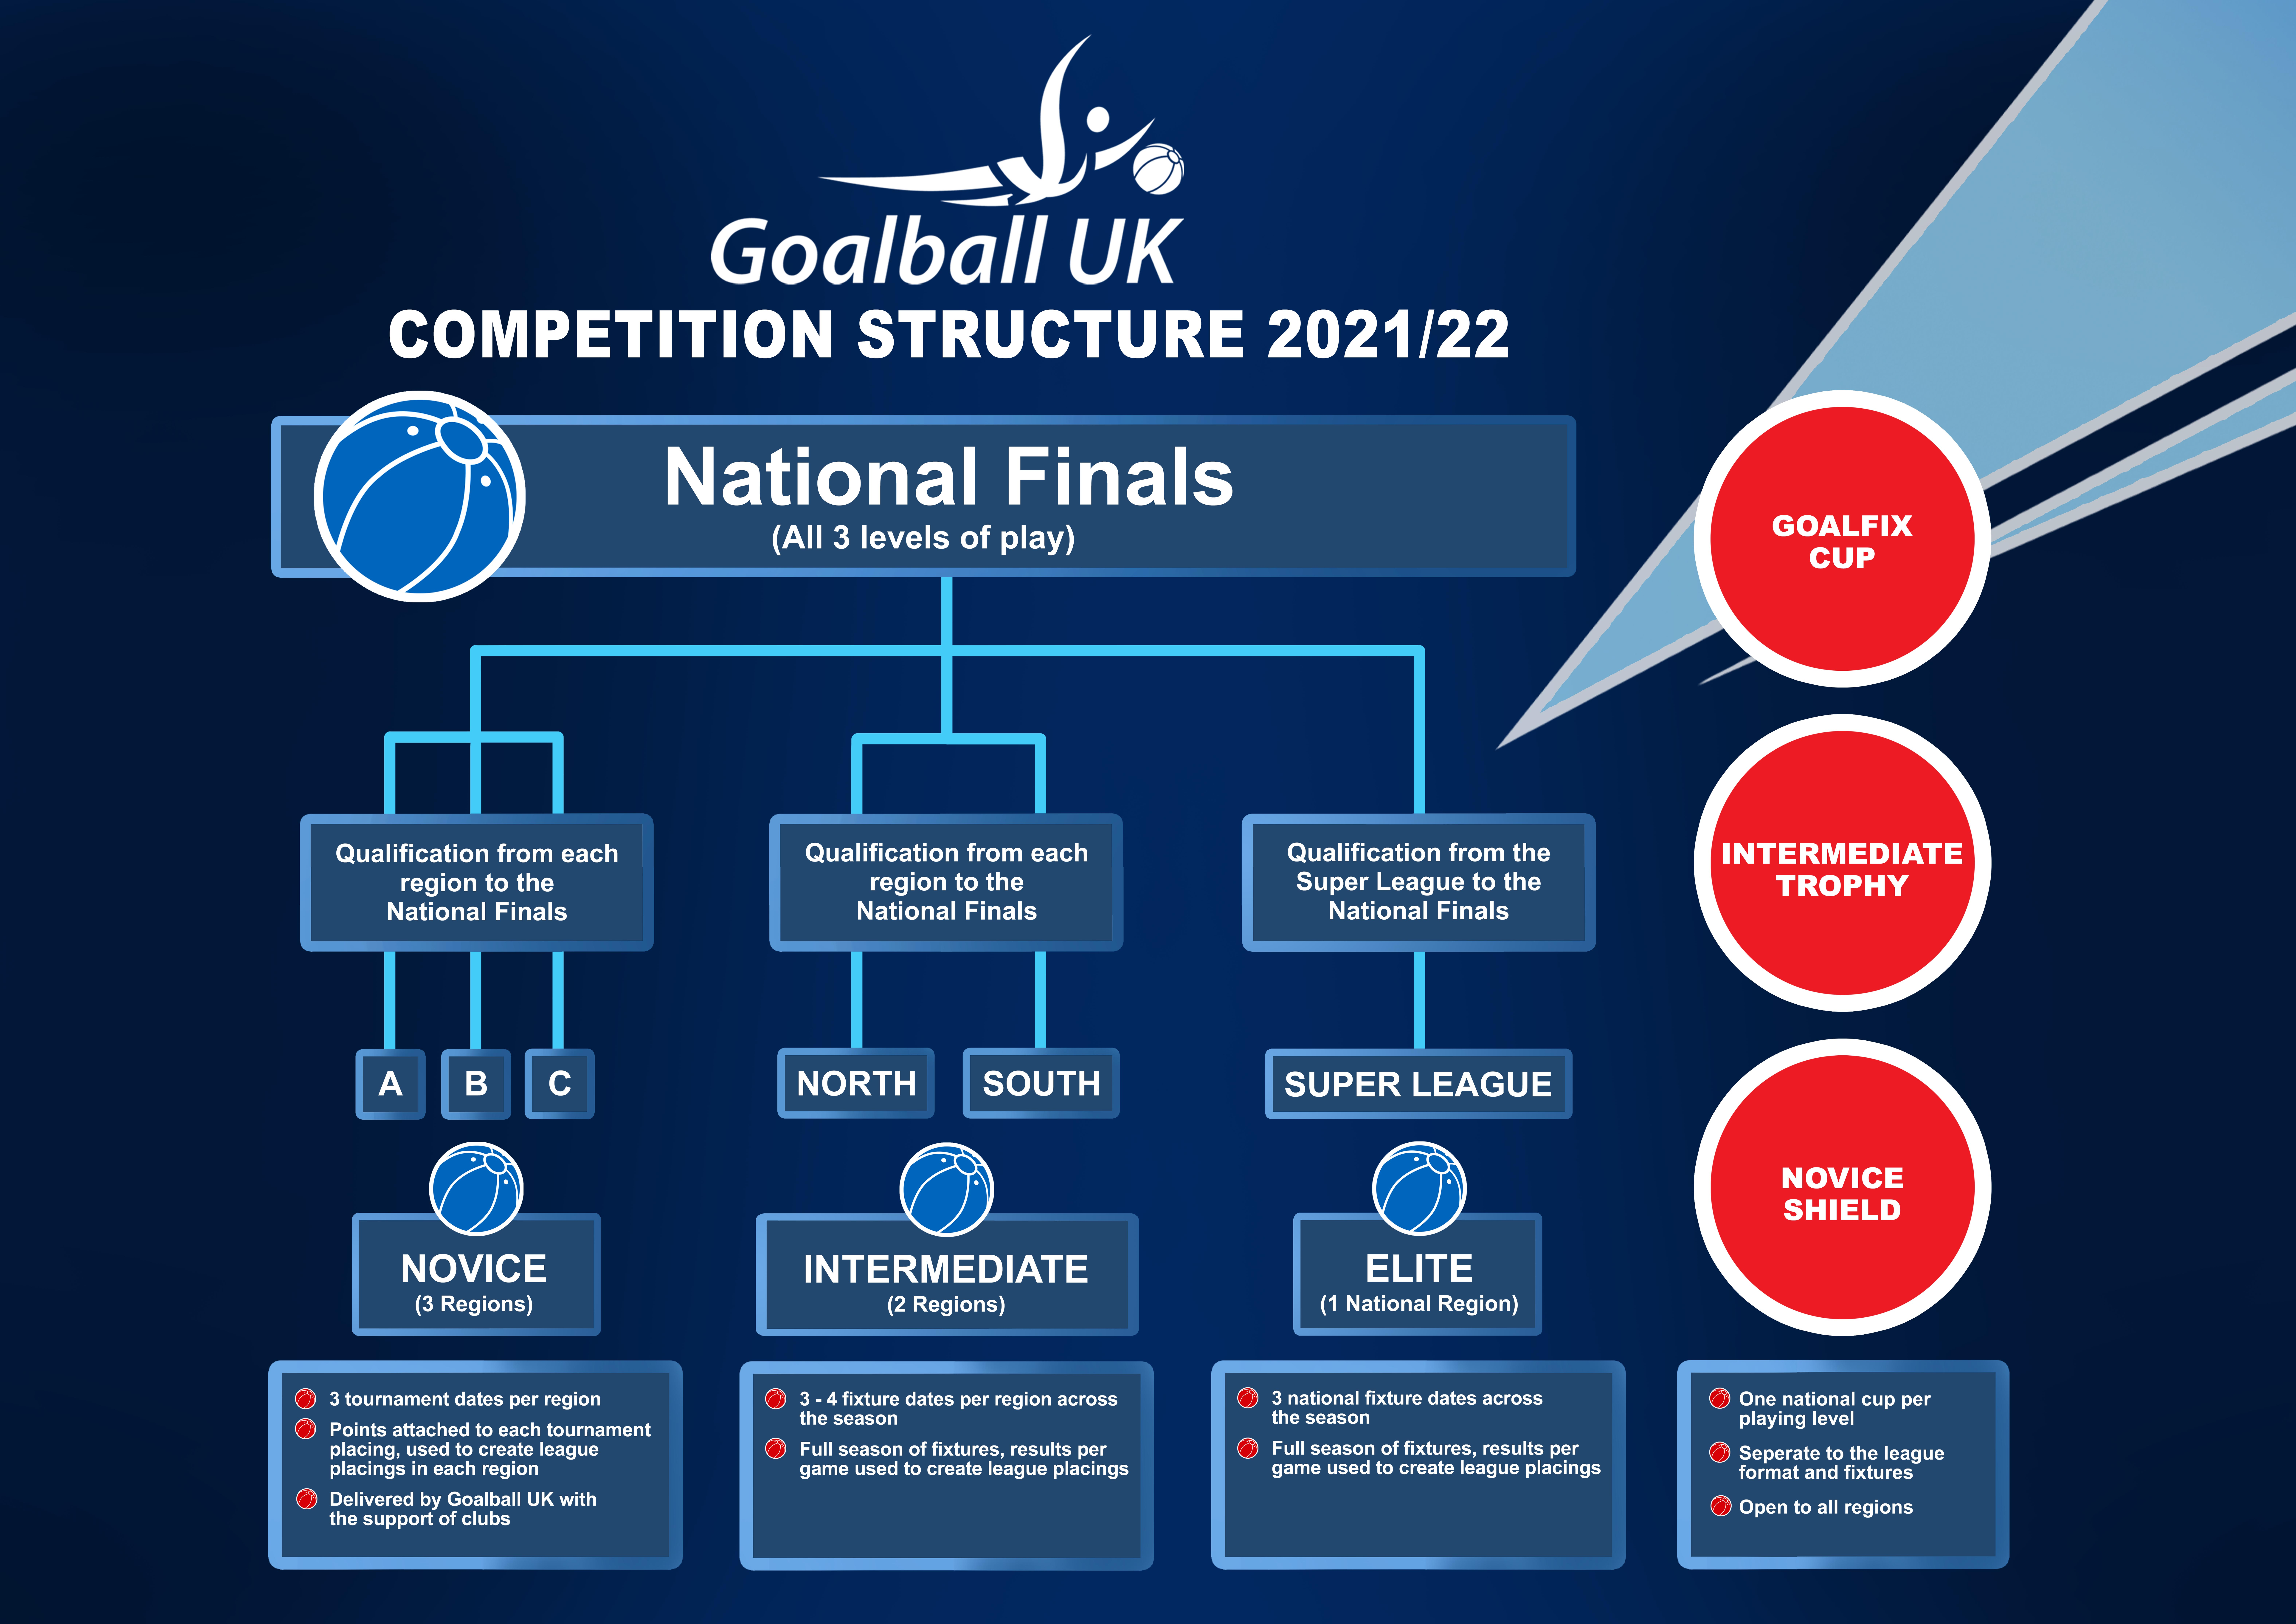 Goalball UK 2021/22 Competition Structure as a diagram